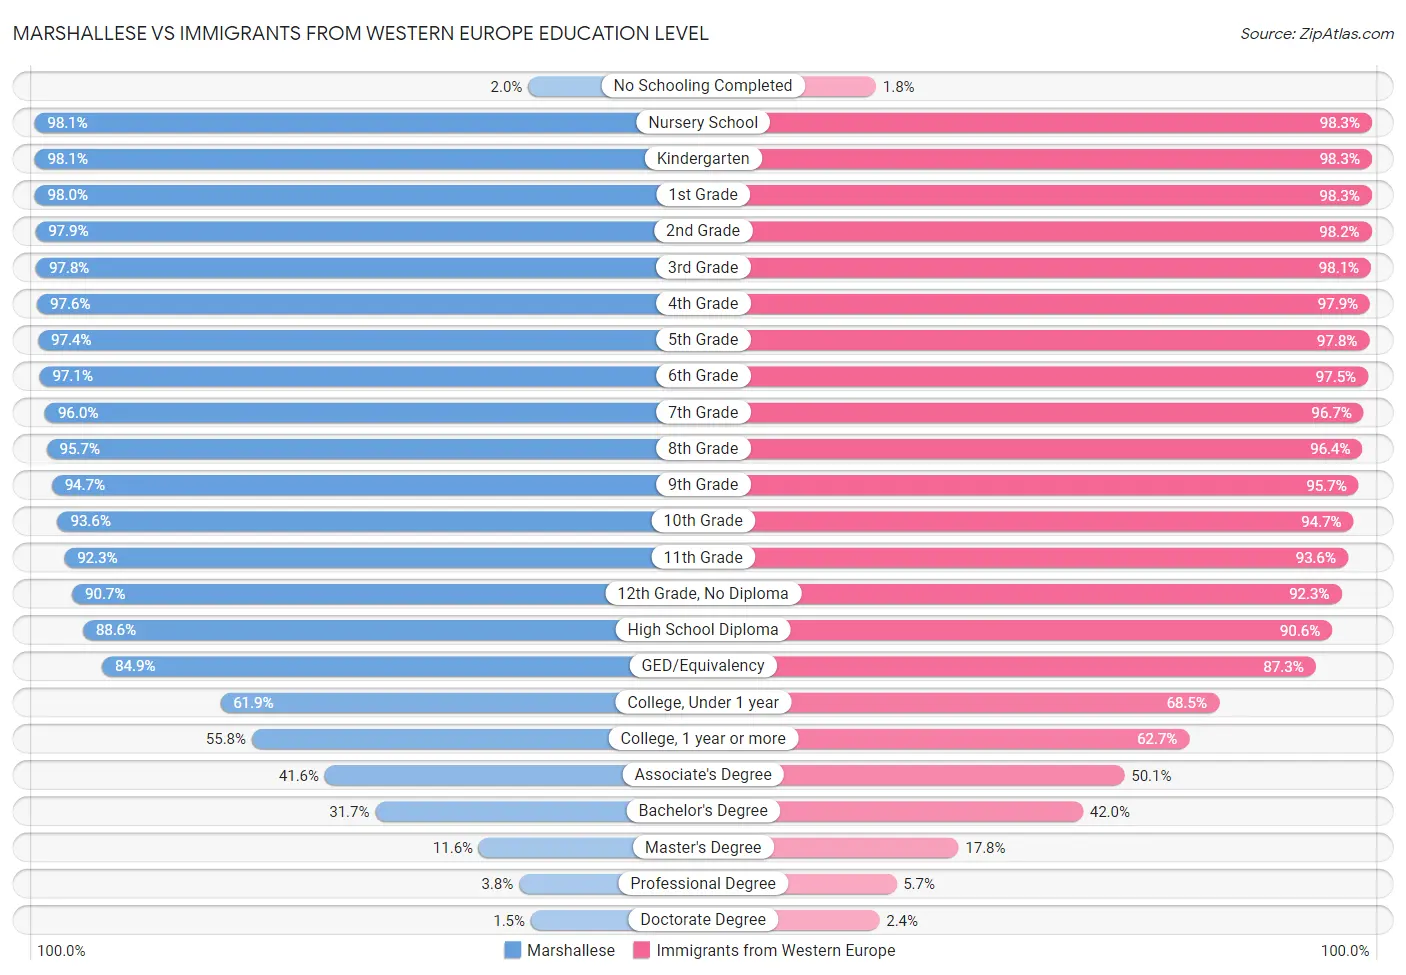 Marshallese vs Immigrants from Western Europe Education Level